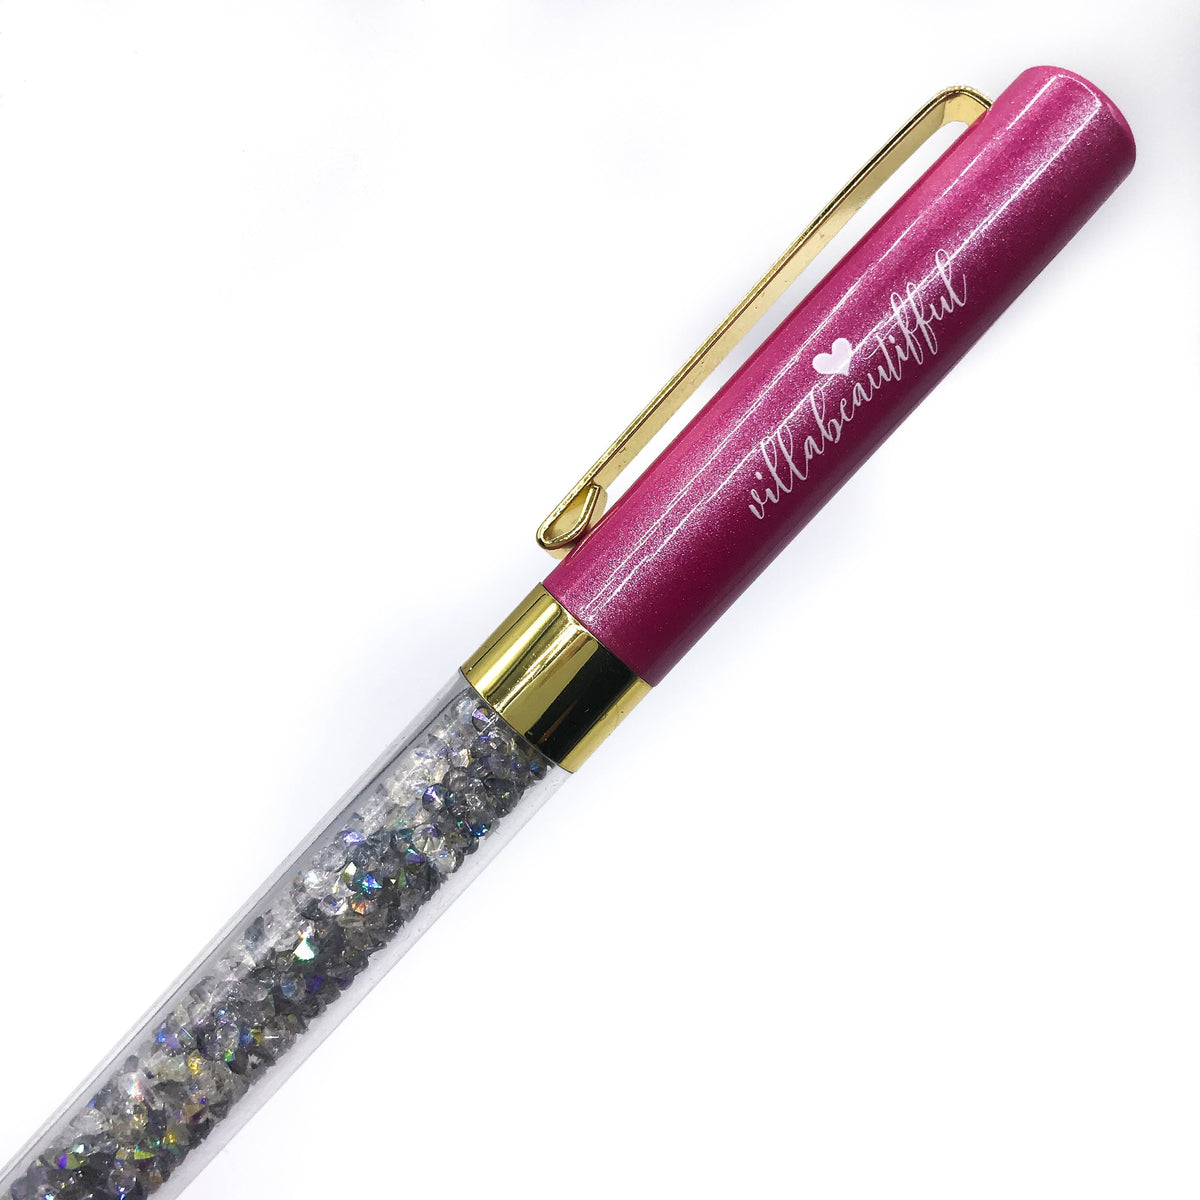 Wild Raspberry Imperfect Crystal VBPen | limited pen